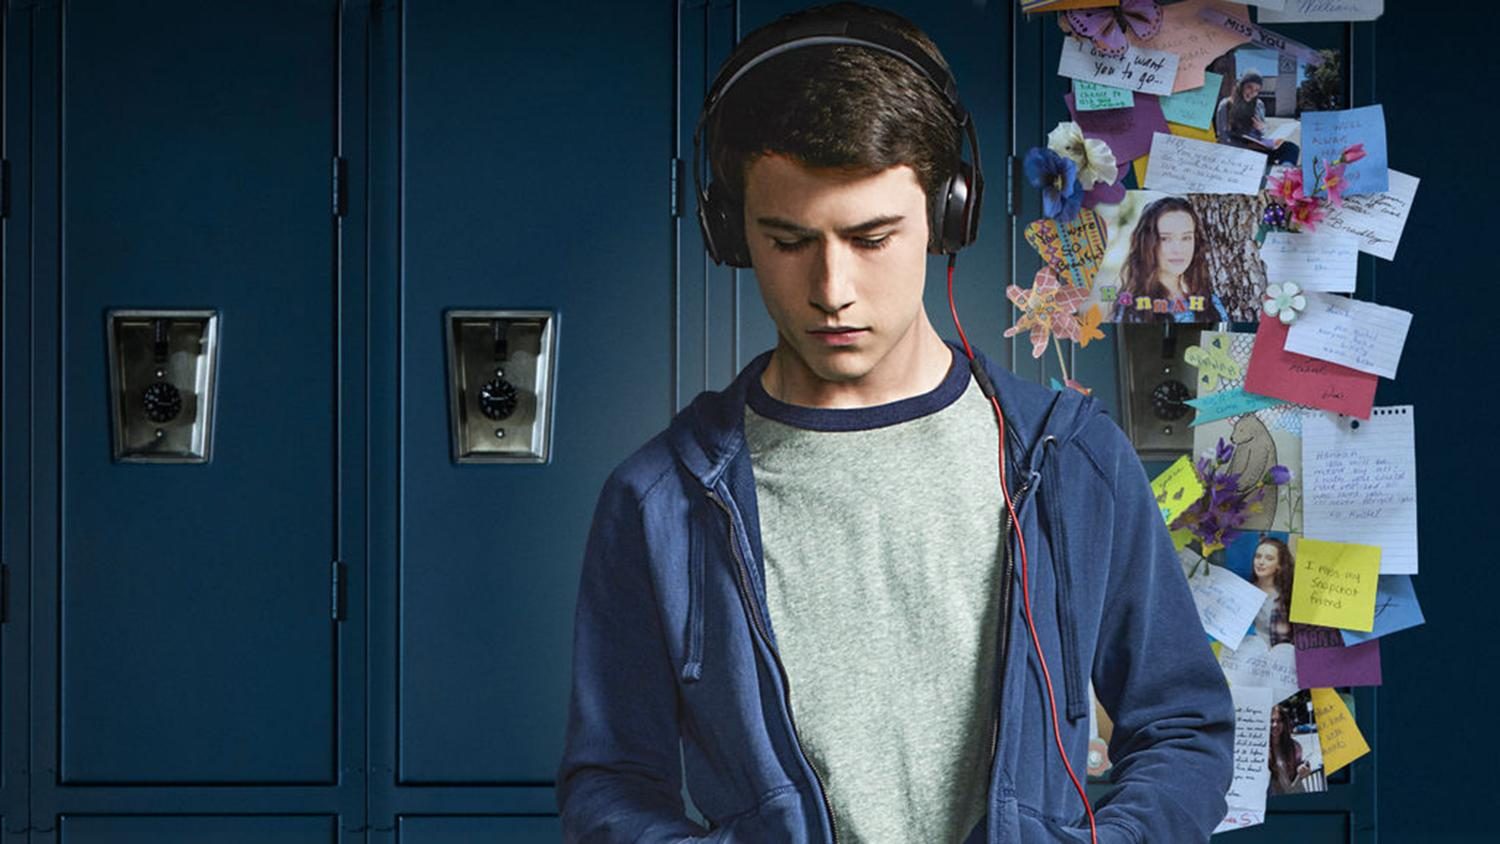 Dylan Minnette, who plays Clay, in 13 Reasons Why, listens to the recording tapes of his close friend Hannah Baker that committed suicide.